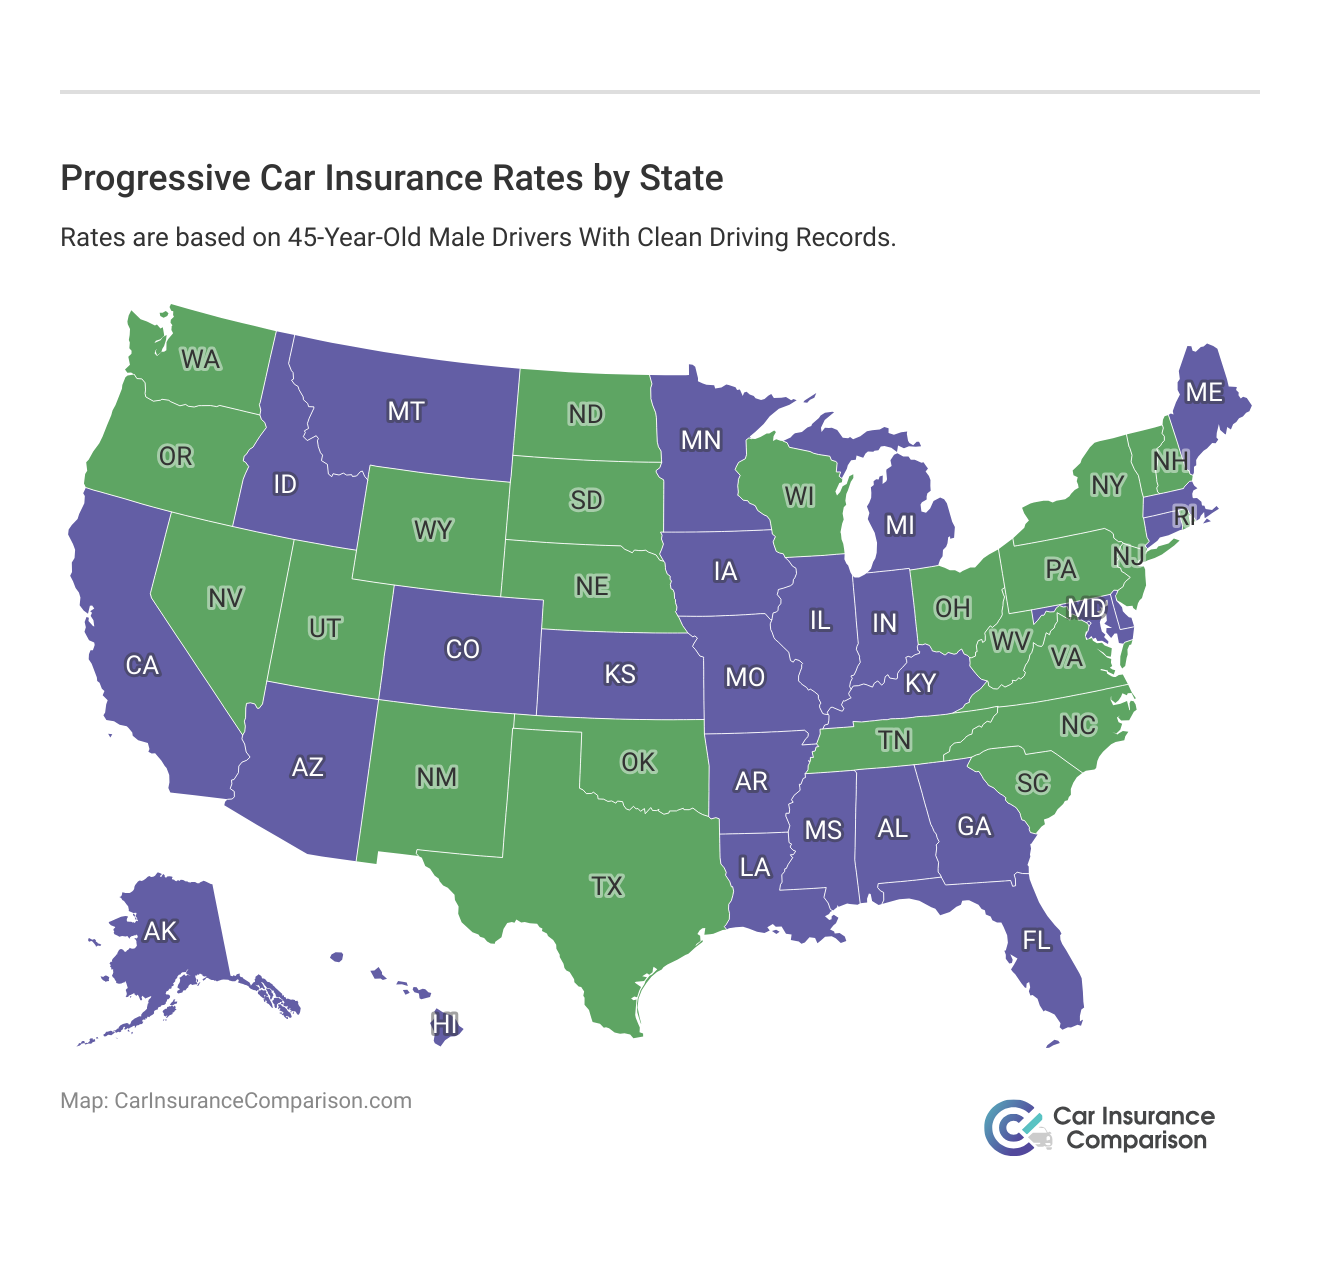 <h3>Progressive Car Insurance Rates by State</h3>